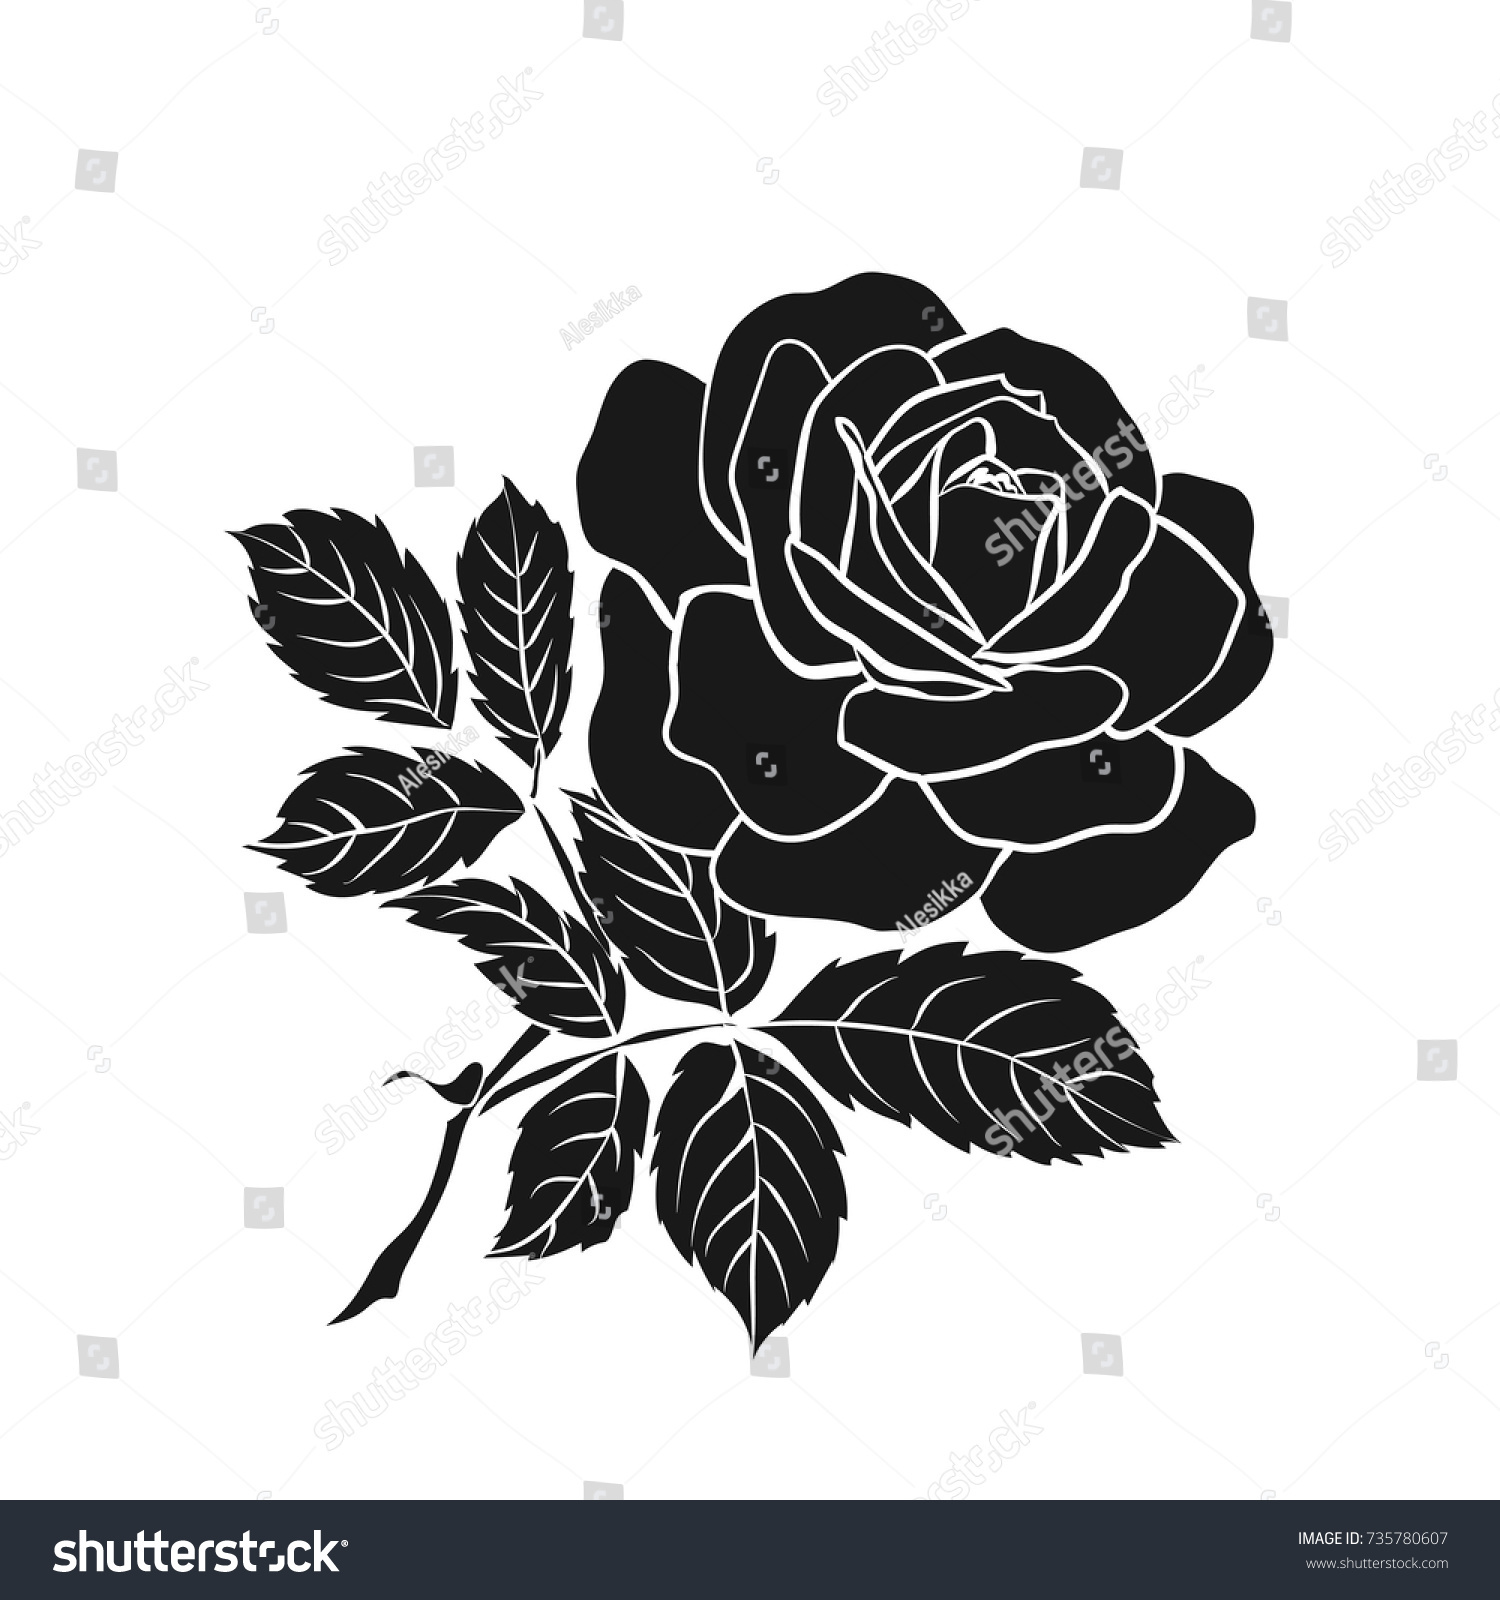 Silhouette Rose Isolated On White Background Stock Vector (Royalty Free ...